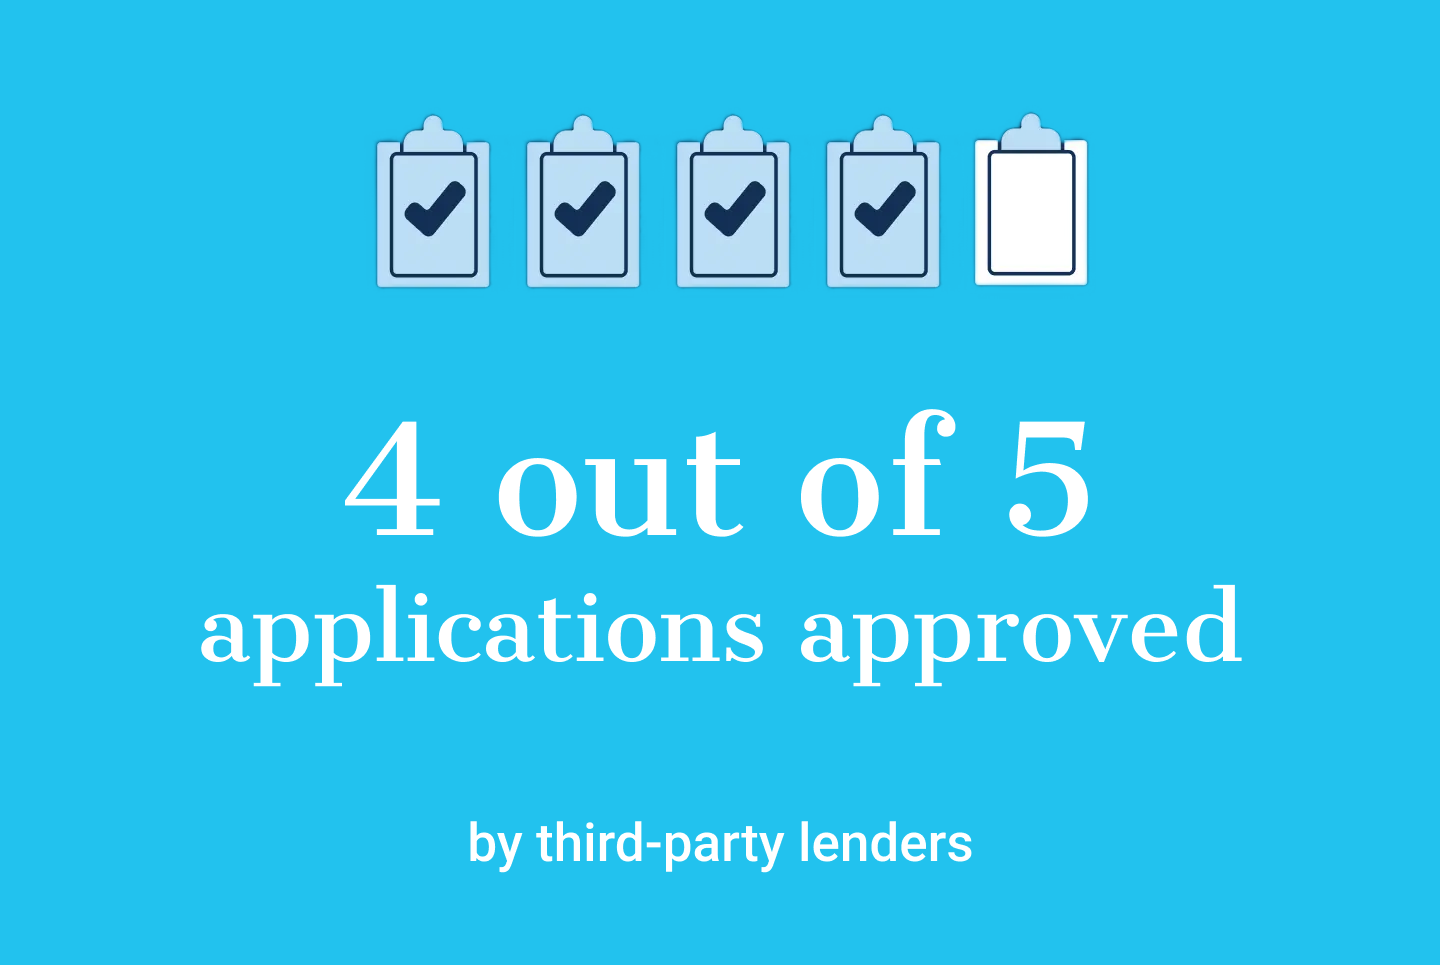 4 out of 5 applications approved